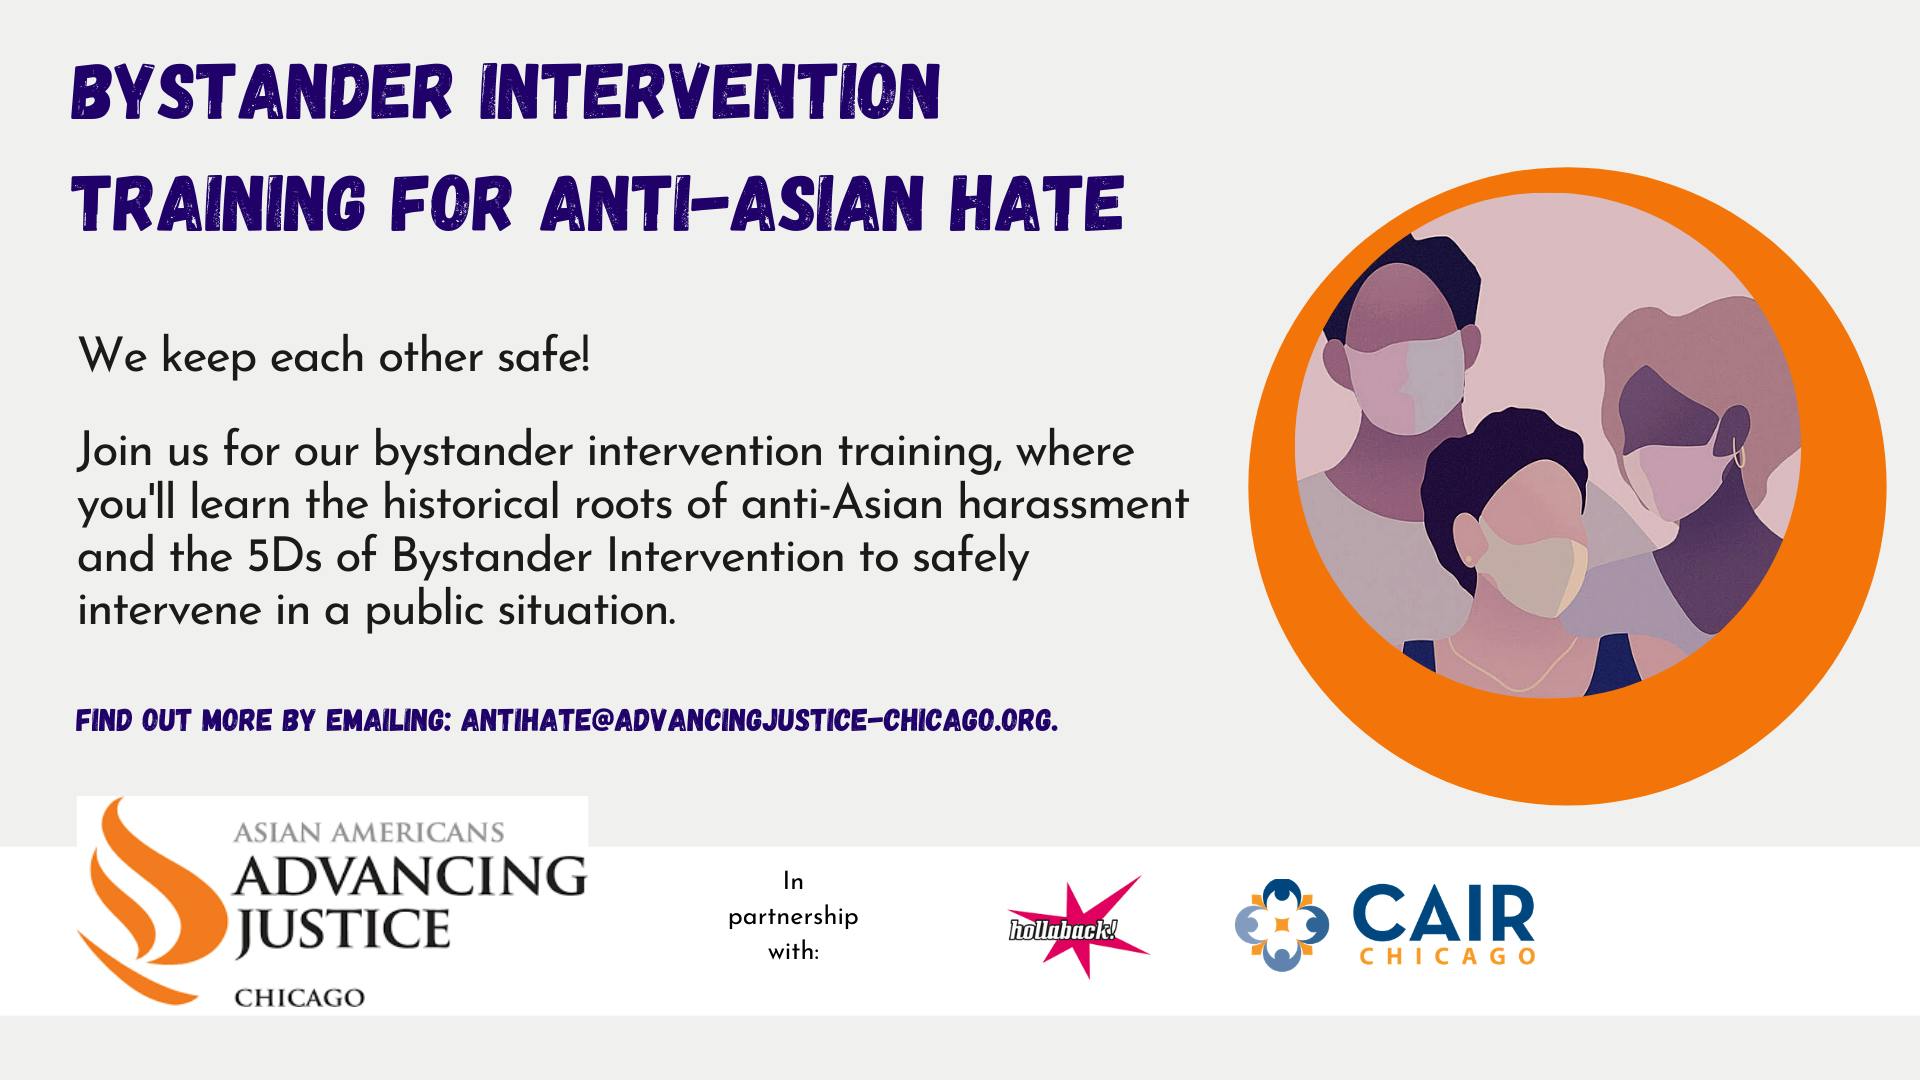 Bystander Intervention Training for Anti-Asian Hate offered by Asian Americans Advancing Justice Chicago in partnership with Hollaback! and CAIR-Chicago